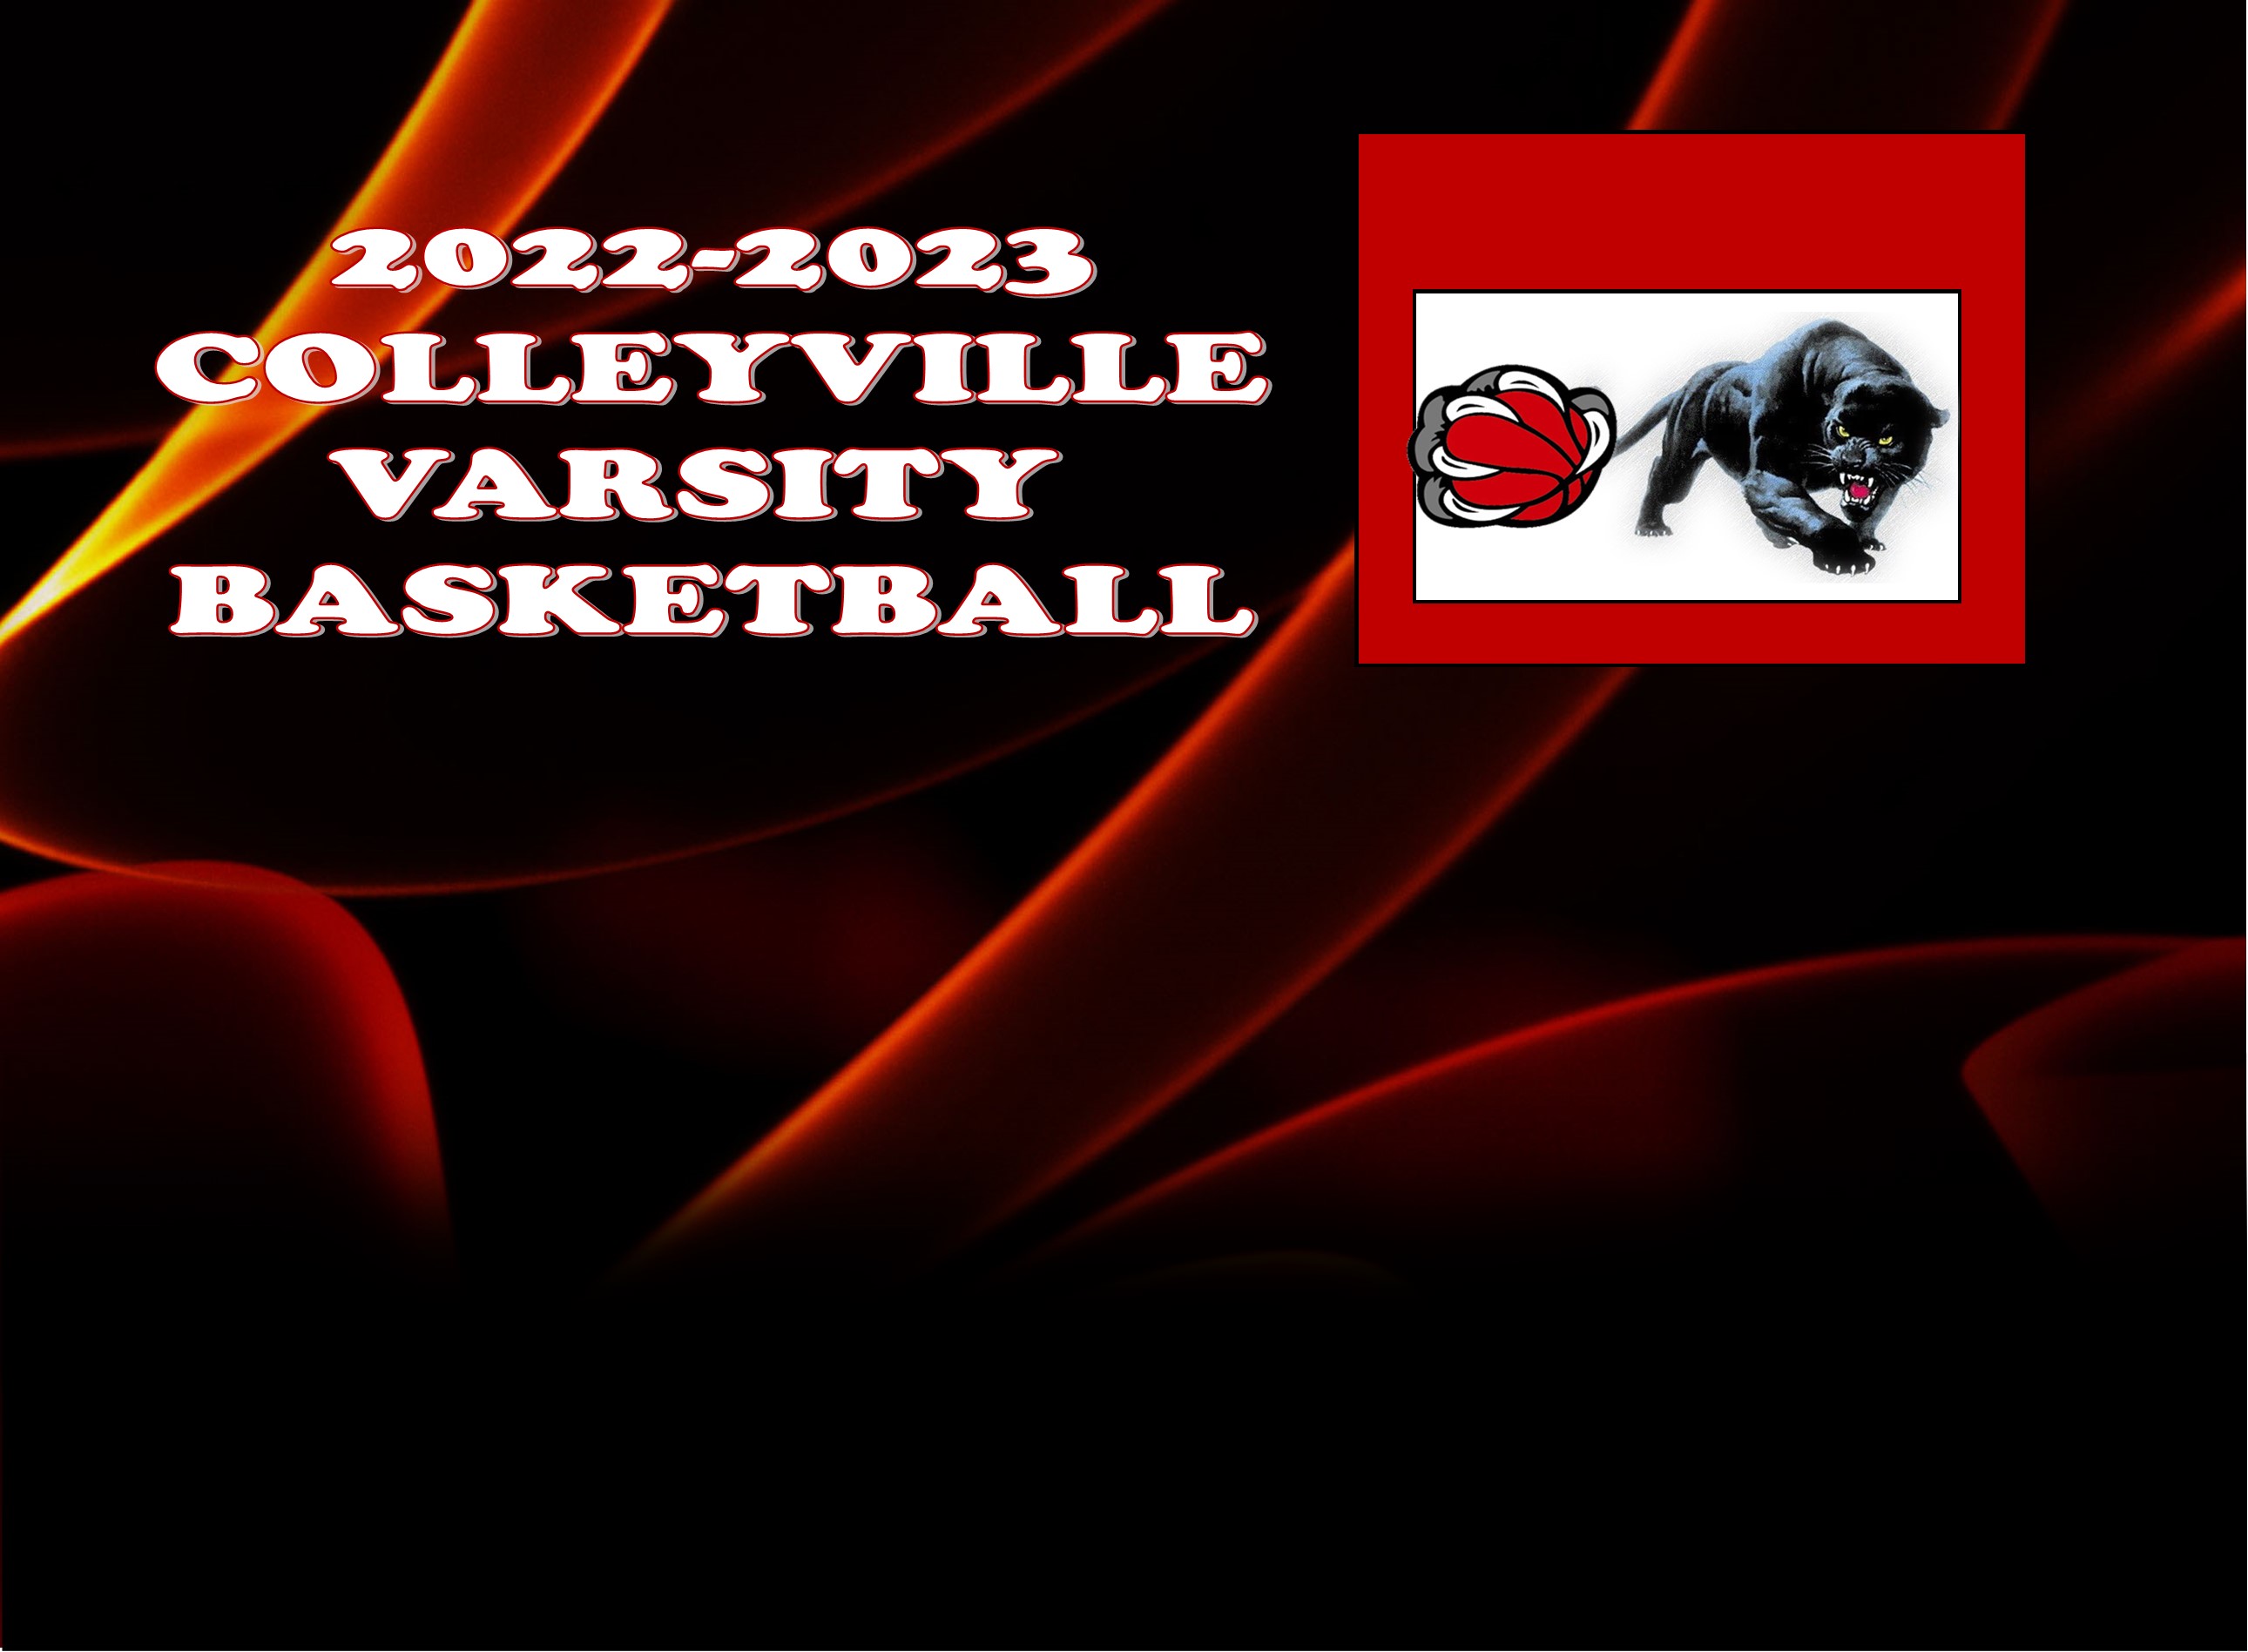 CHHS Varsity Basketball: Colleyville Panthers Fall to Rival Grapevine Mustangs in District Game 48-40